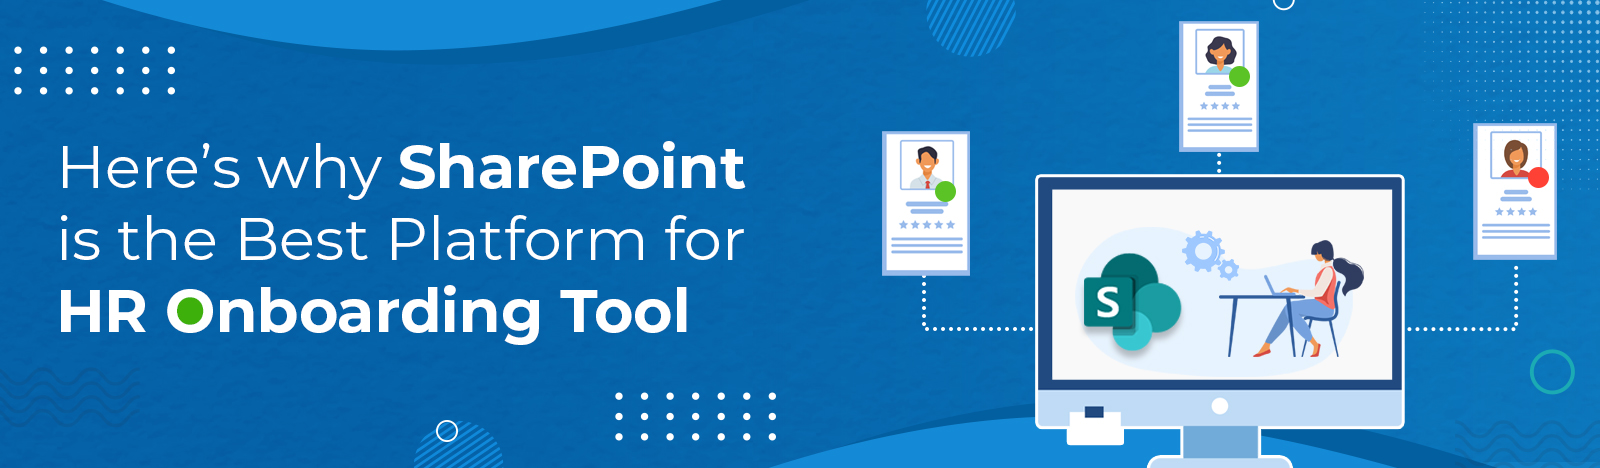 SharePoint is the Best Platform for HR Onboarding Tool